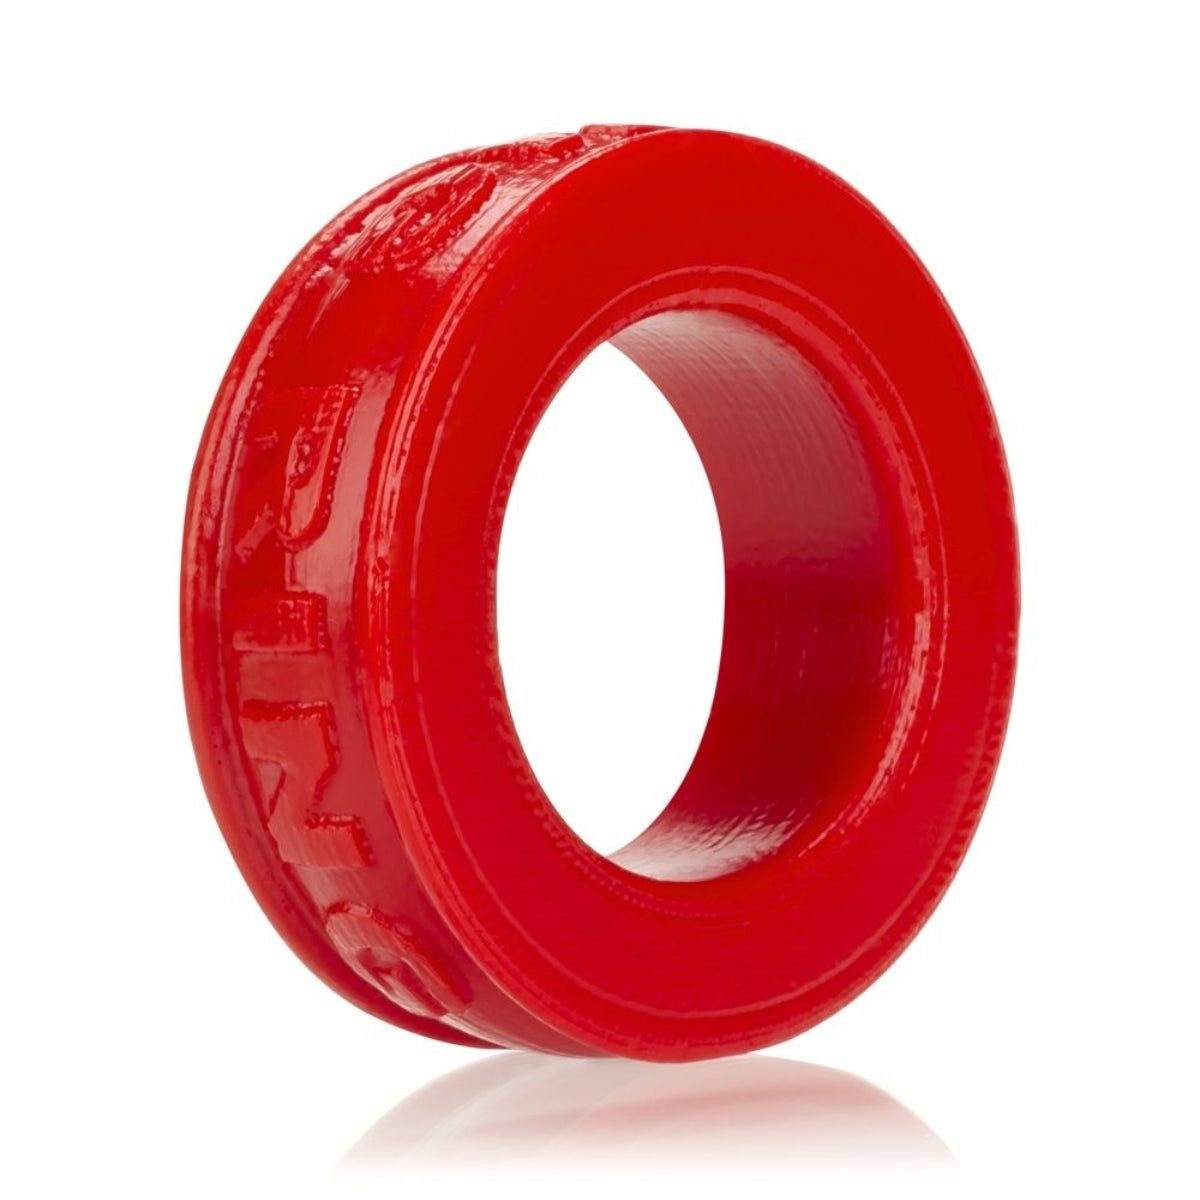 Oxballs Pig Ring Cock Ring Red